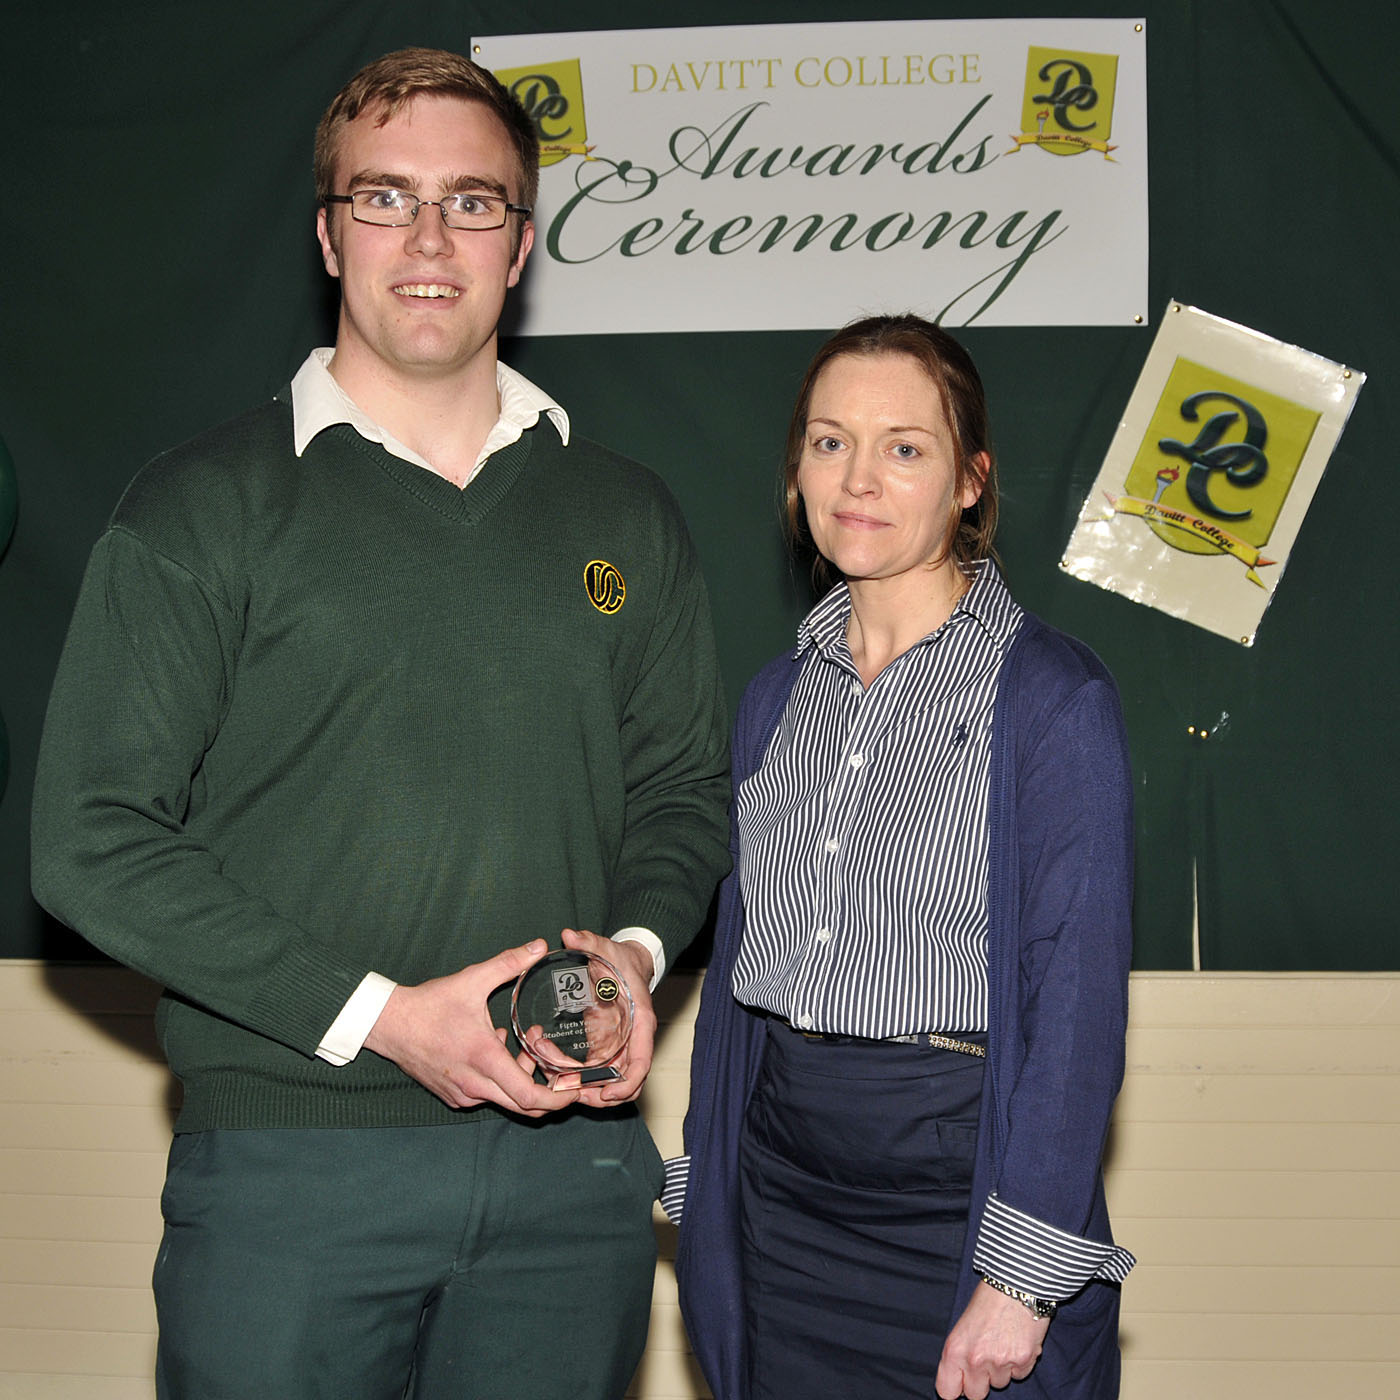 Davitt College awards 2013, Fintan Murphy 5th year student of the year award with Elaine Mortimer, year head. Photo © Ken Wright Photography 2013.